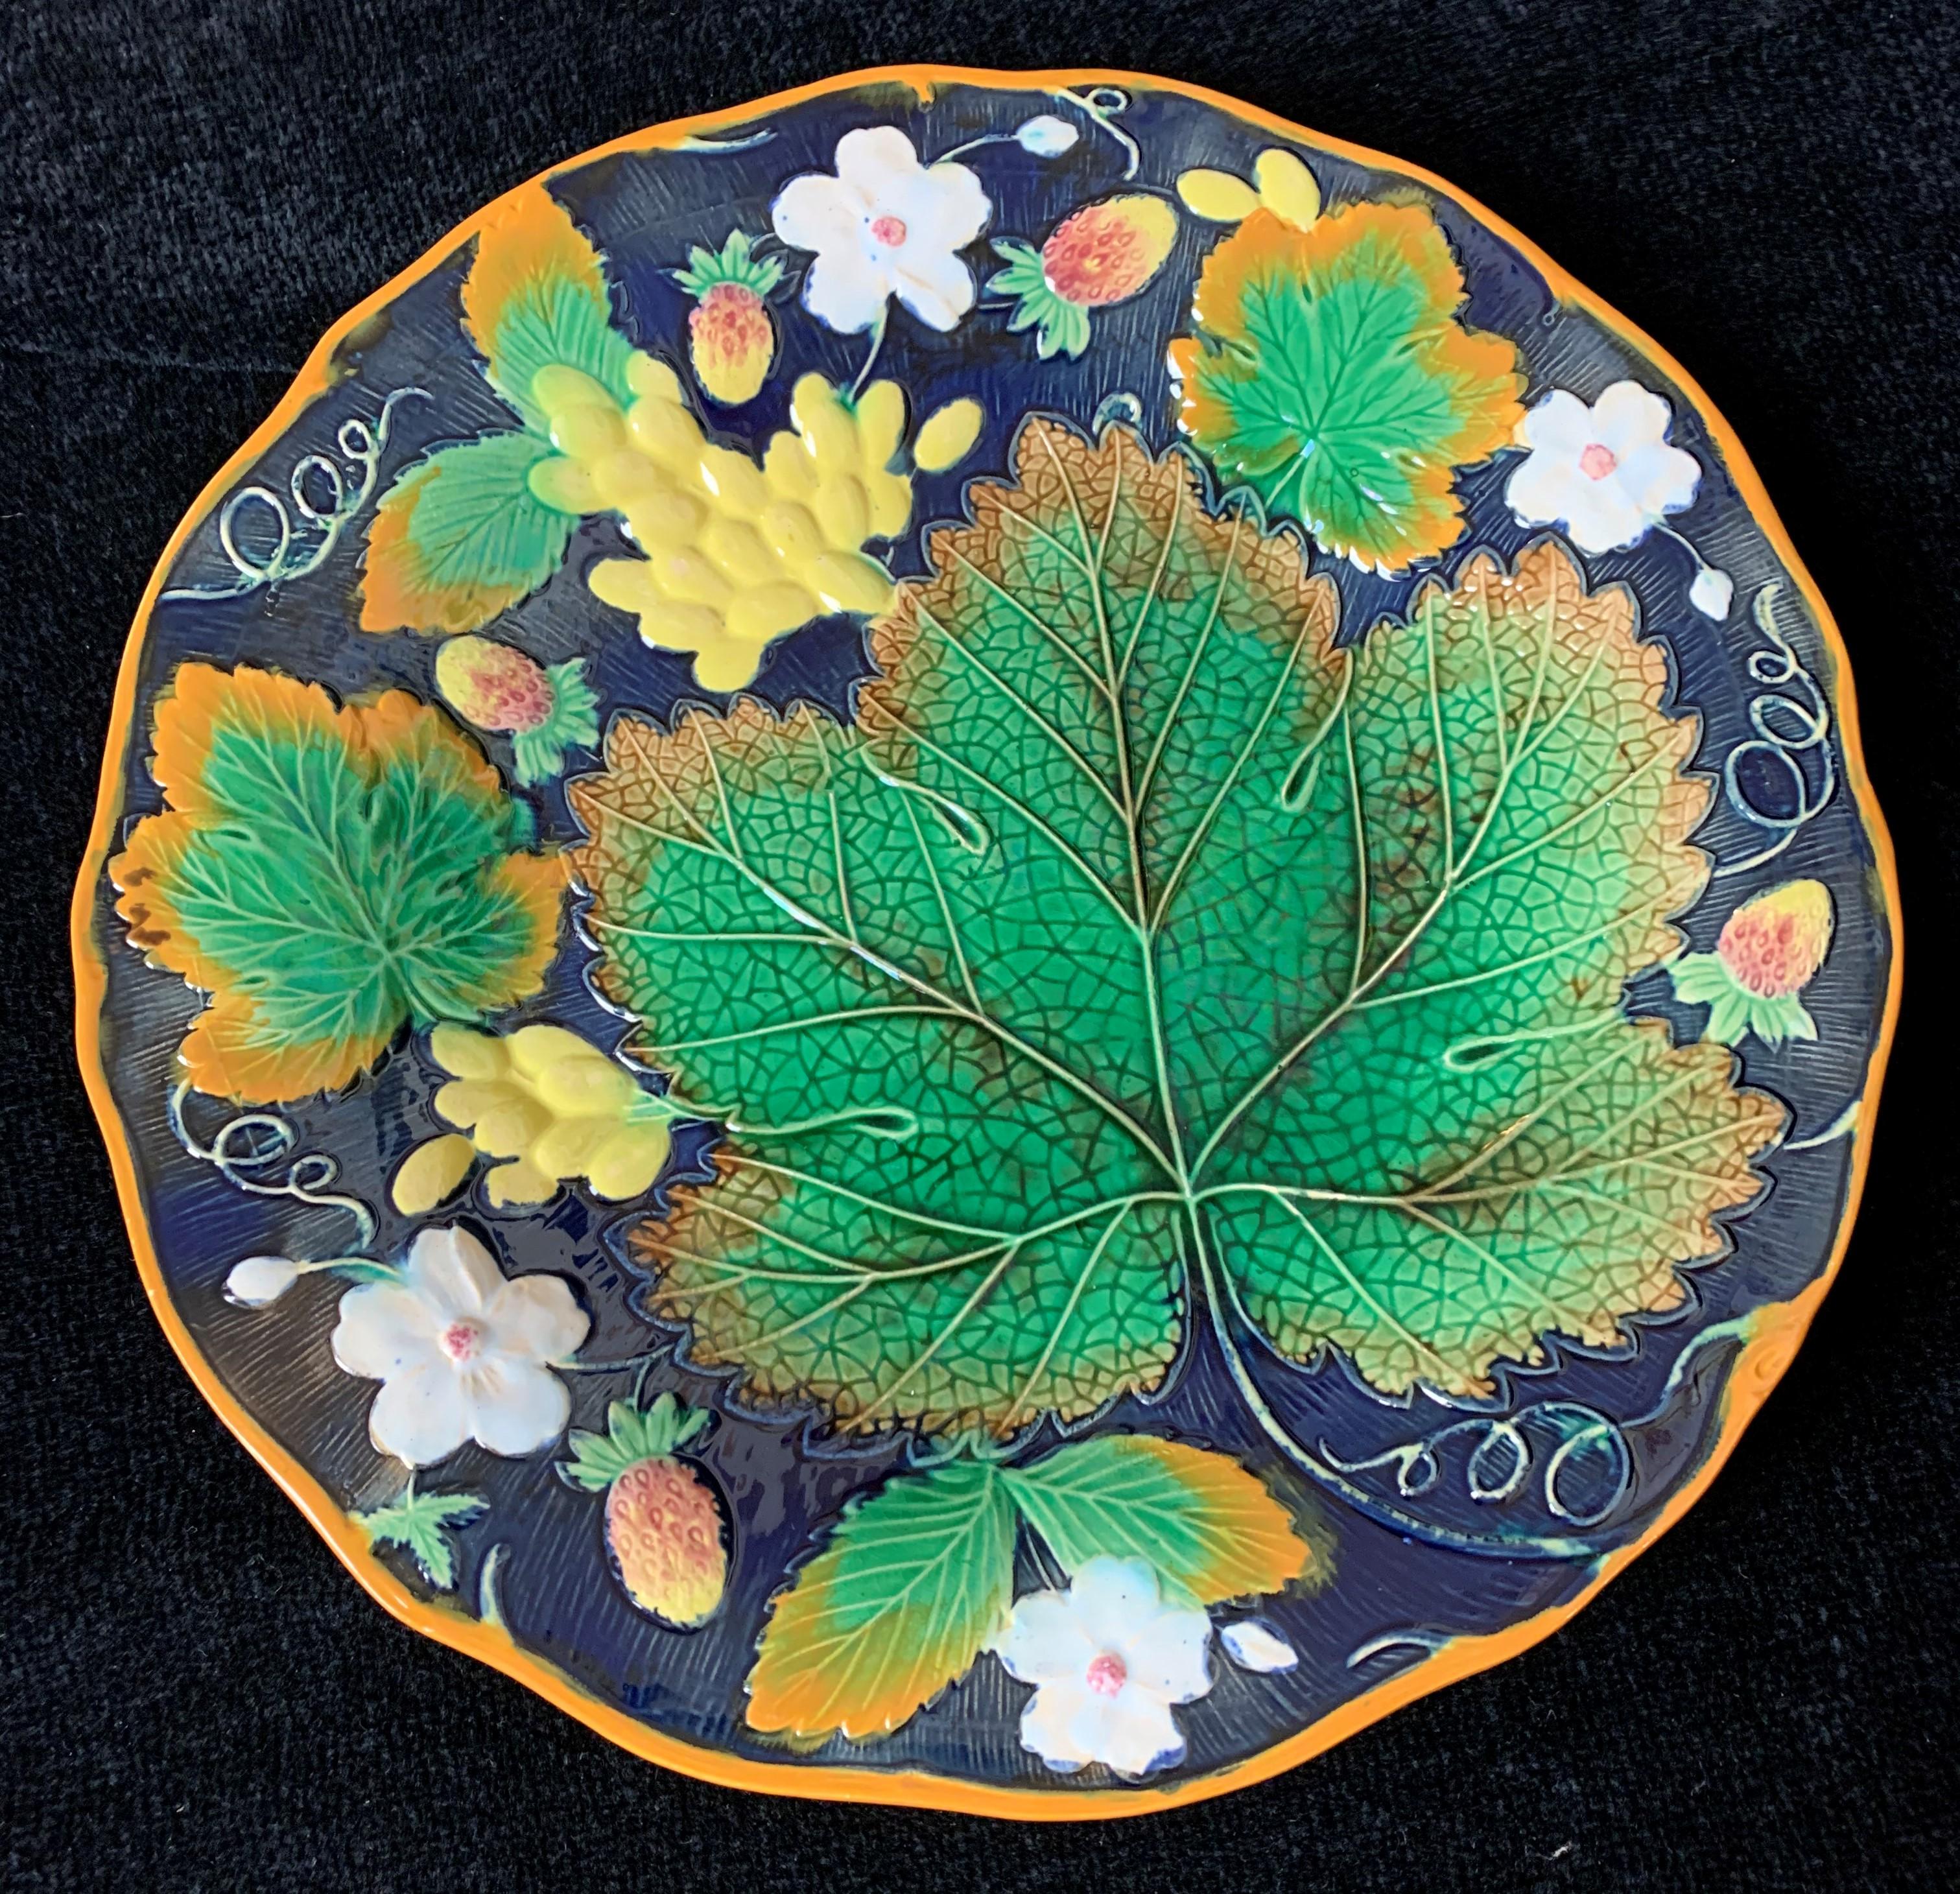 William Brownfield Majolica Leaf and Strawberry 9-inch Plate in Cobalt Blue, English, 1876, in highly desirable cobalt ground. Impressed mark to reverse 'BROWNFIELD' with date code: '7/76' for July 1876.
In excellent antique condition, with no